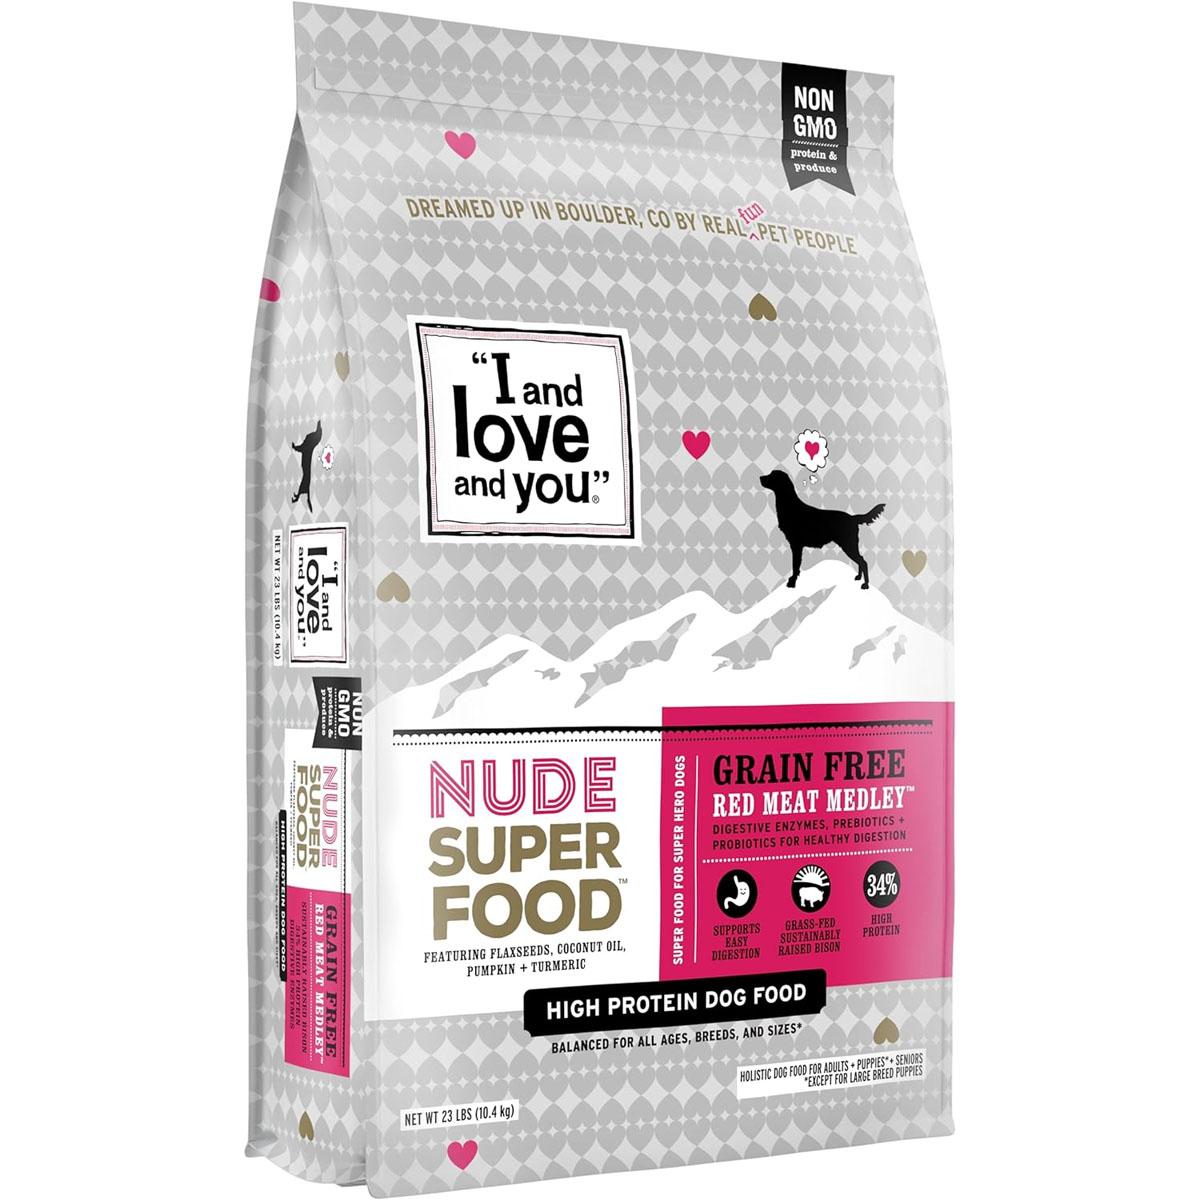 I and love and you Nude Superfood Dry Dog Food for $38 Shipped